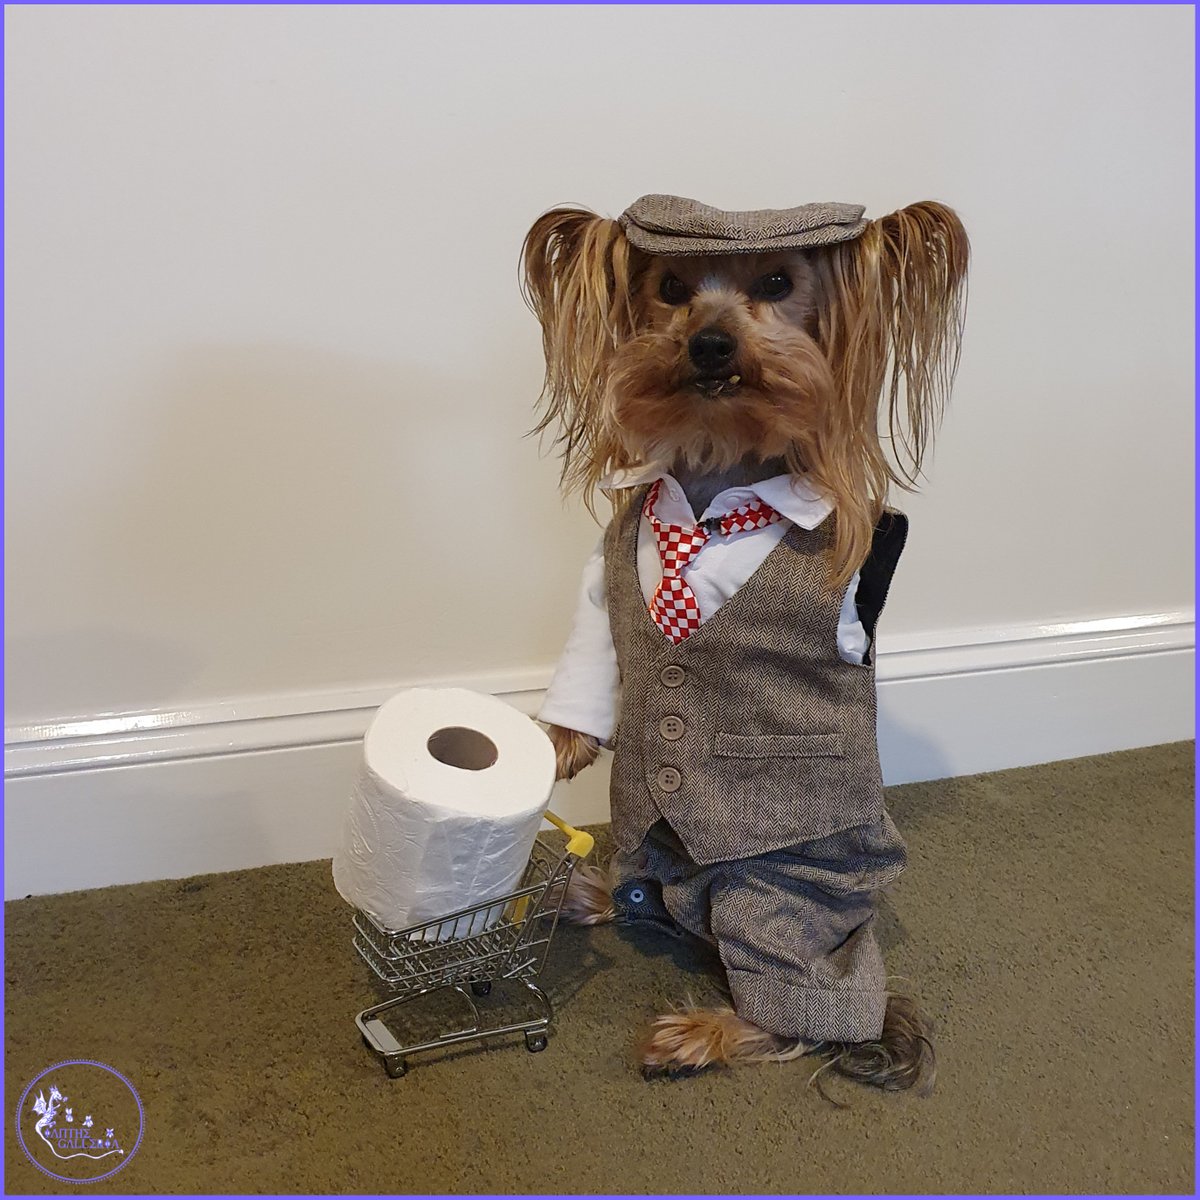 #FlashbackFriday to the first Lockdown in 2020.
#NationalToiletPaperDay & @Mr_Pelucchi went on a little shopping trip.
It is also #InternationalDogDay so why not share some of your 4 or 3 legged friends with us in the comments. 
#AMZart #DogsOfTwitter #MrPels #SmallBiz #EarlyBiz